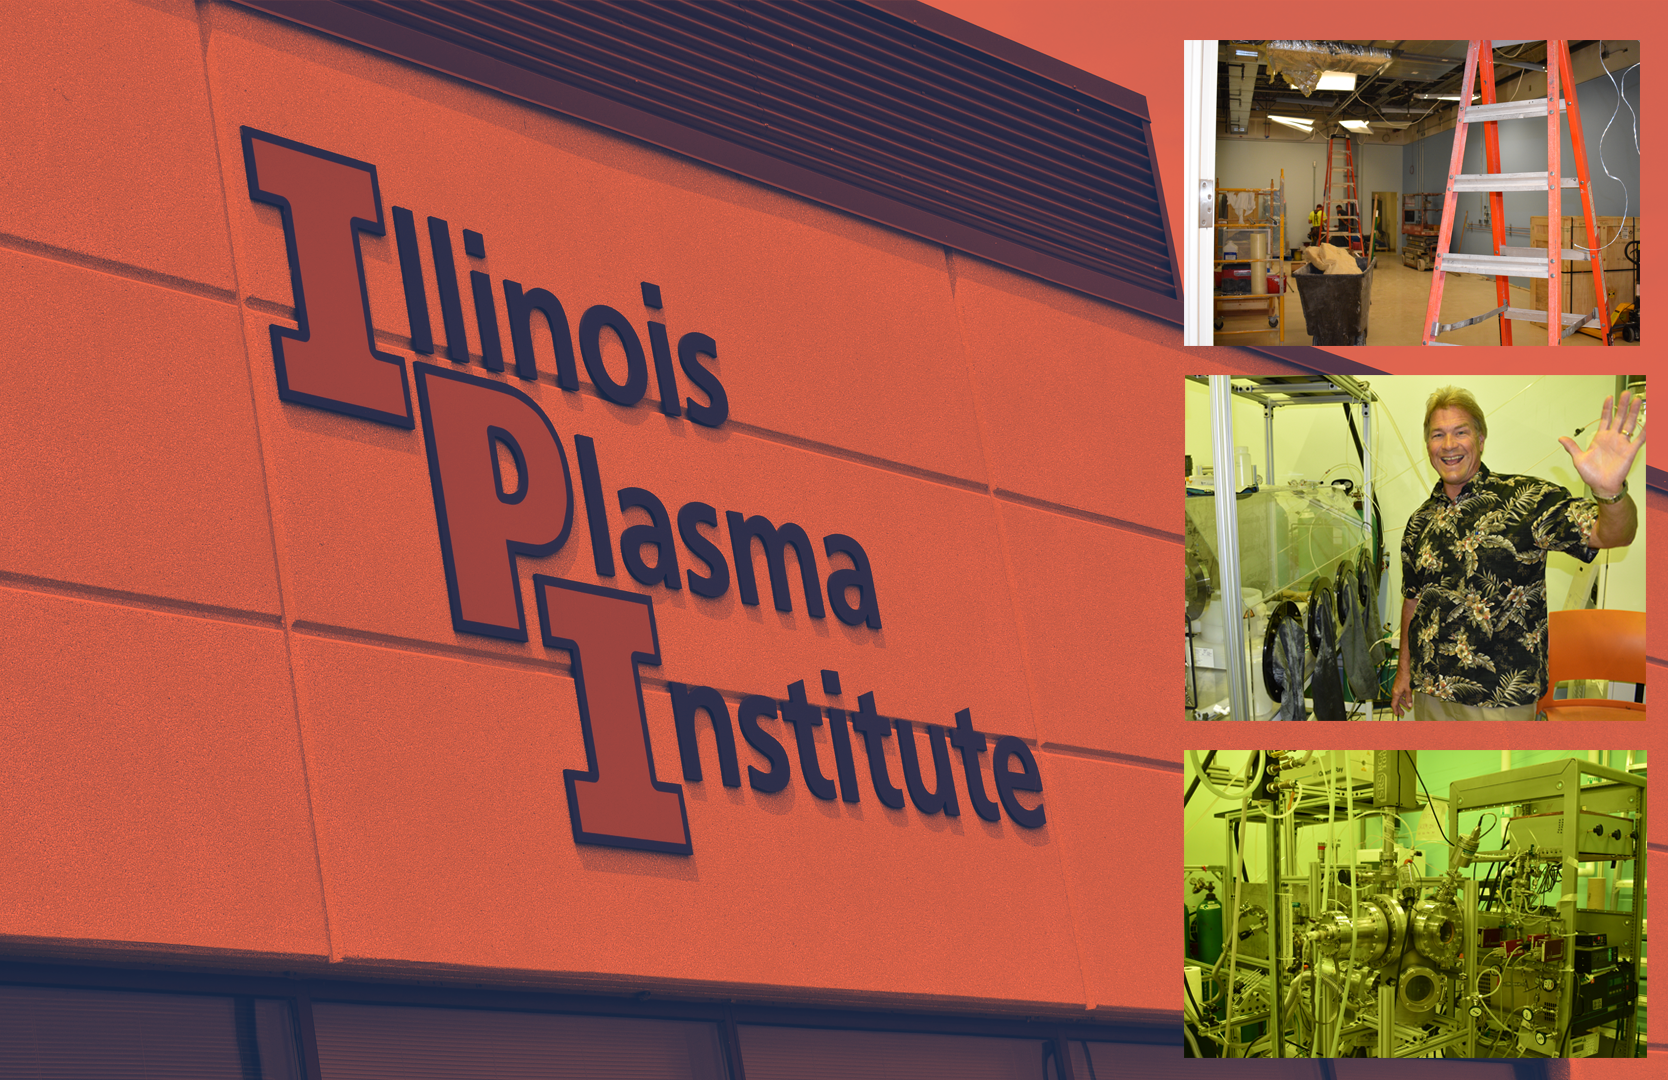 Illinois Plasma Institute expands space in Research Park